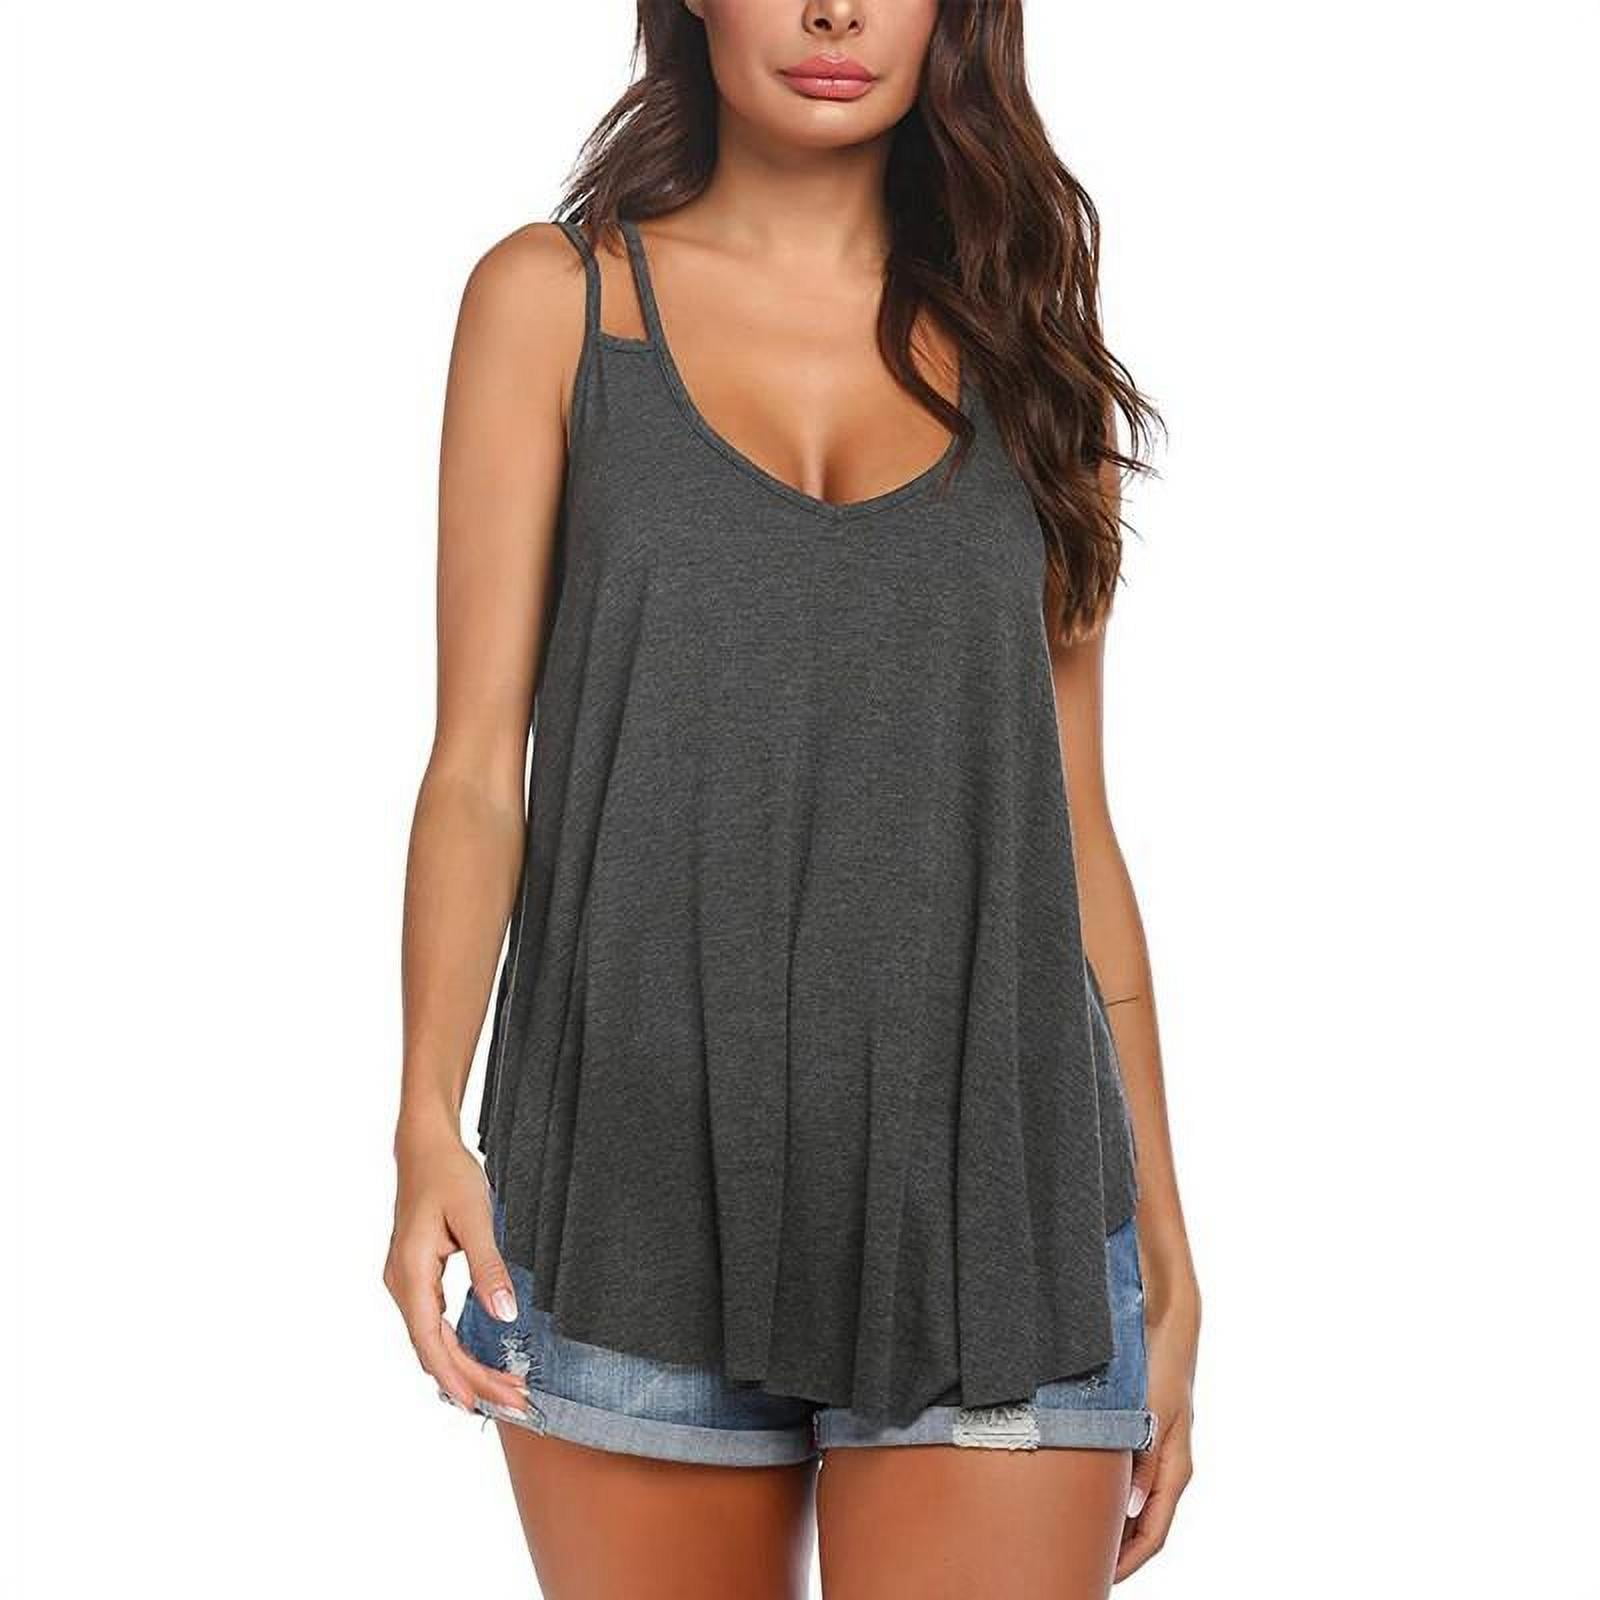 Womens Ladies New Camisole  Plain Strappy Swing Vest Top Flared Sleeveless*hanky 